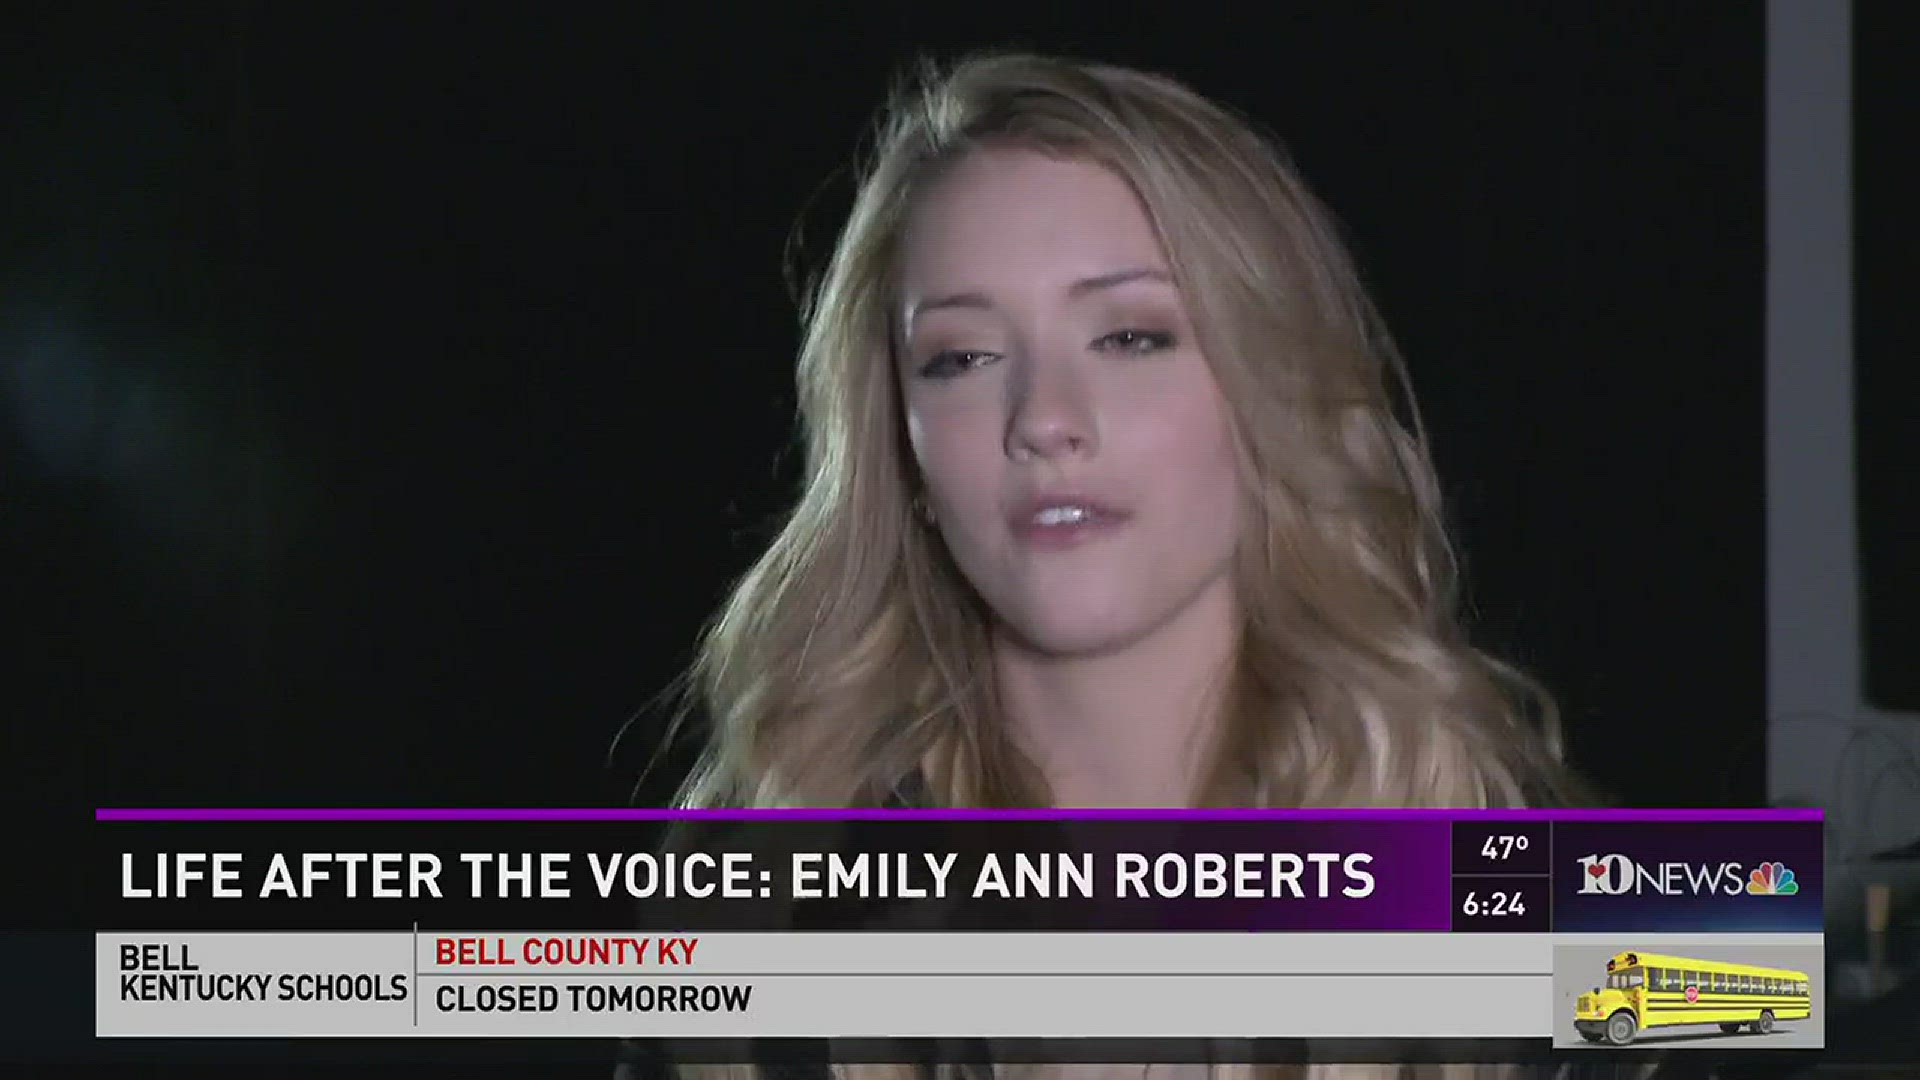 Emily Ann Roberts is back at home in Knoxville, but she is still continuing her music career through new performances and a photoshoot.